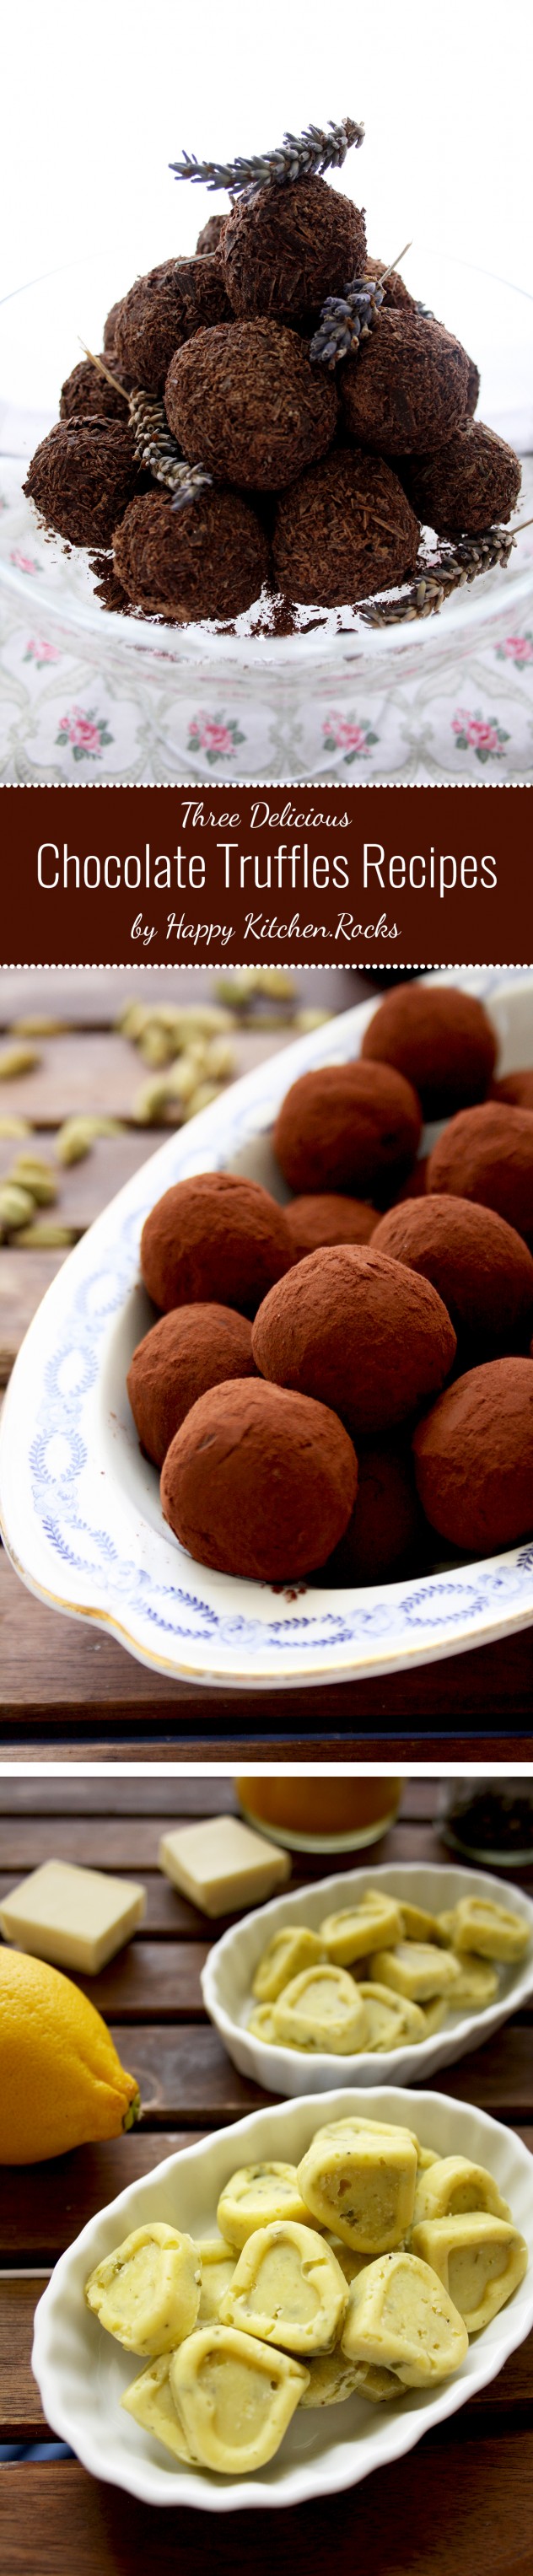 Three Delicious Chocolate Truffles Recipes. Three amazing favors: dark chocolate with cardamom or lavender and white chocolate with lemon and pistachios.